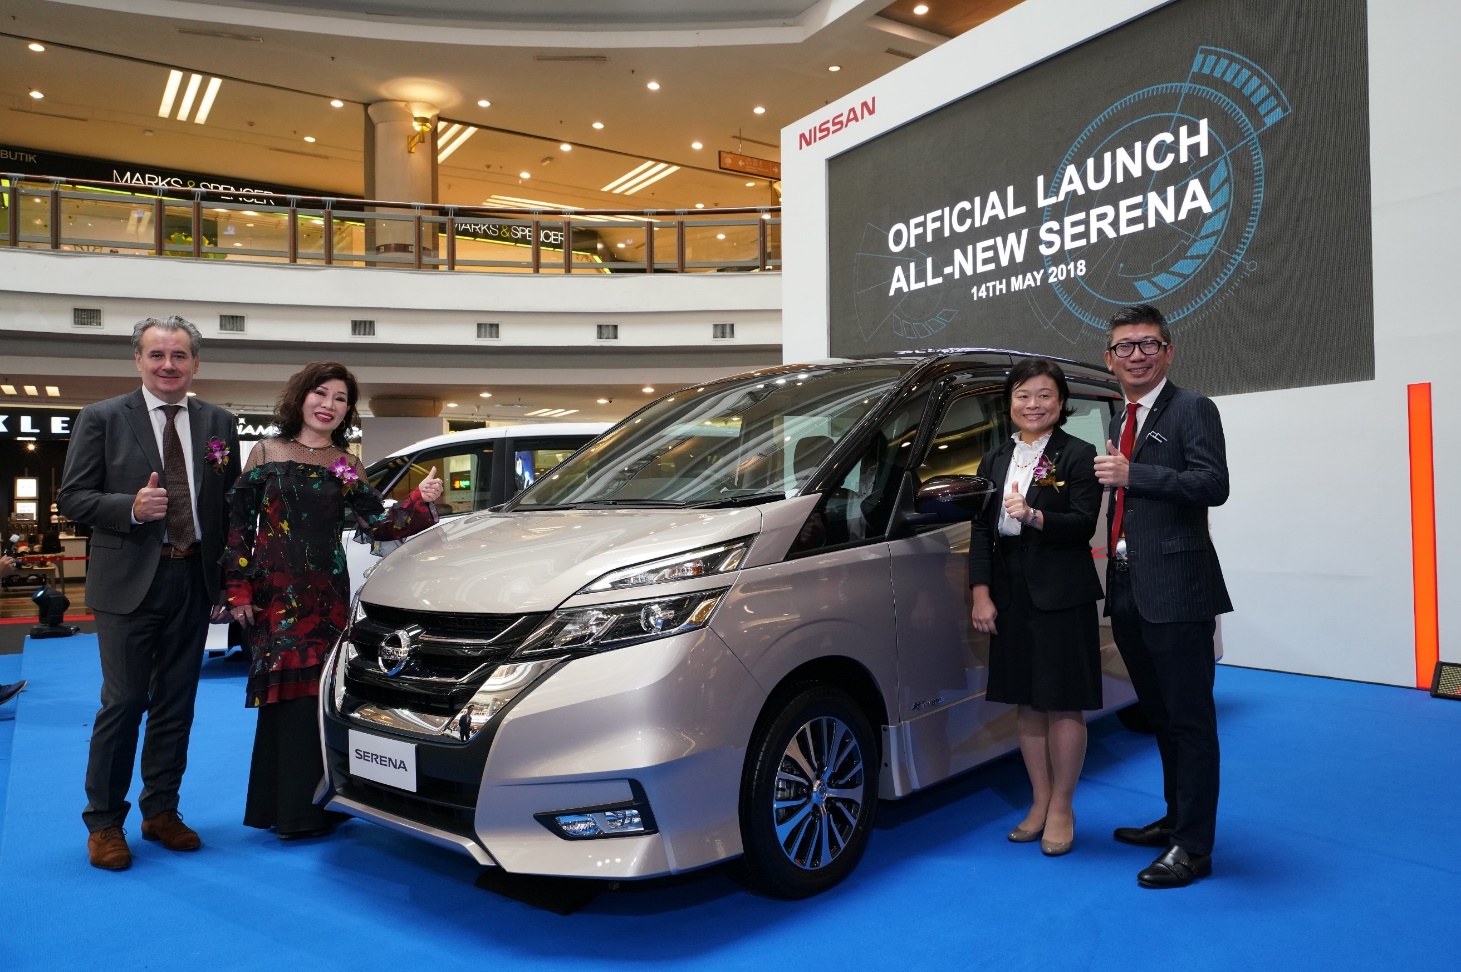 http://intranet.tanchonggroup.com/wp-content/uploads/All-New-Serena-S-Hybrid-Official-Launch.jpg